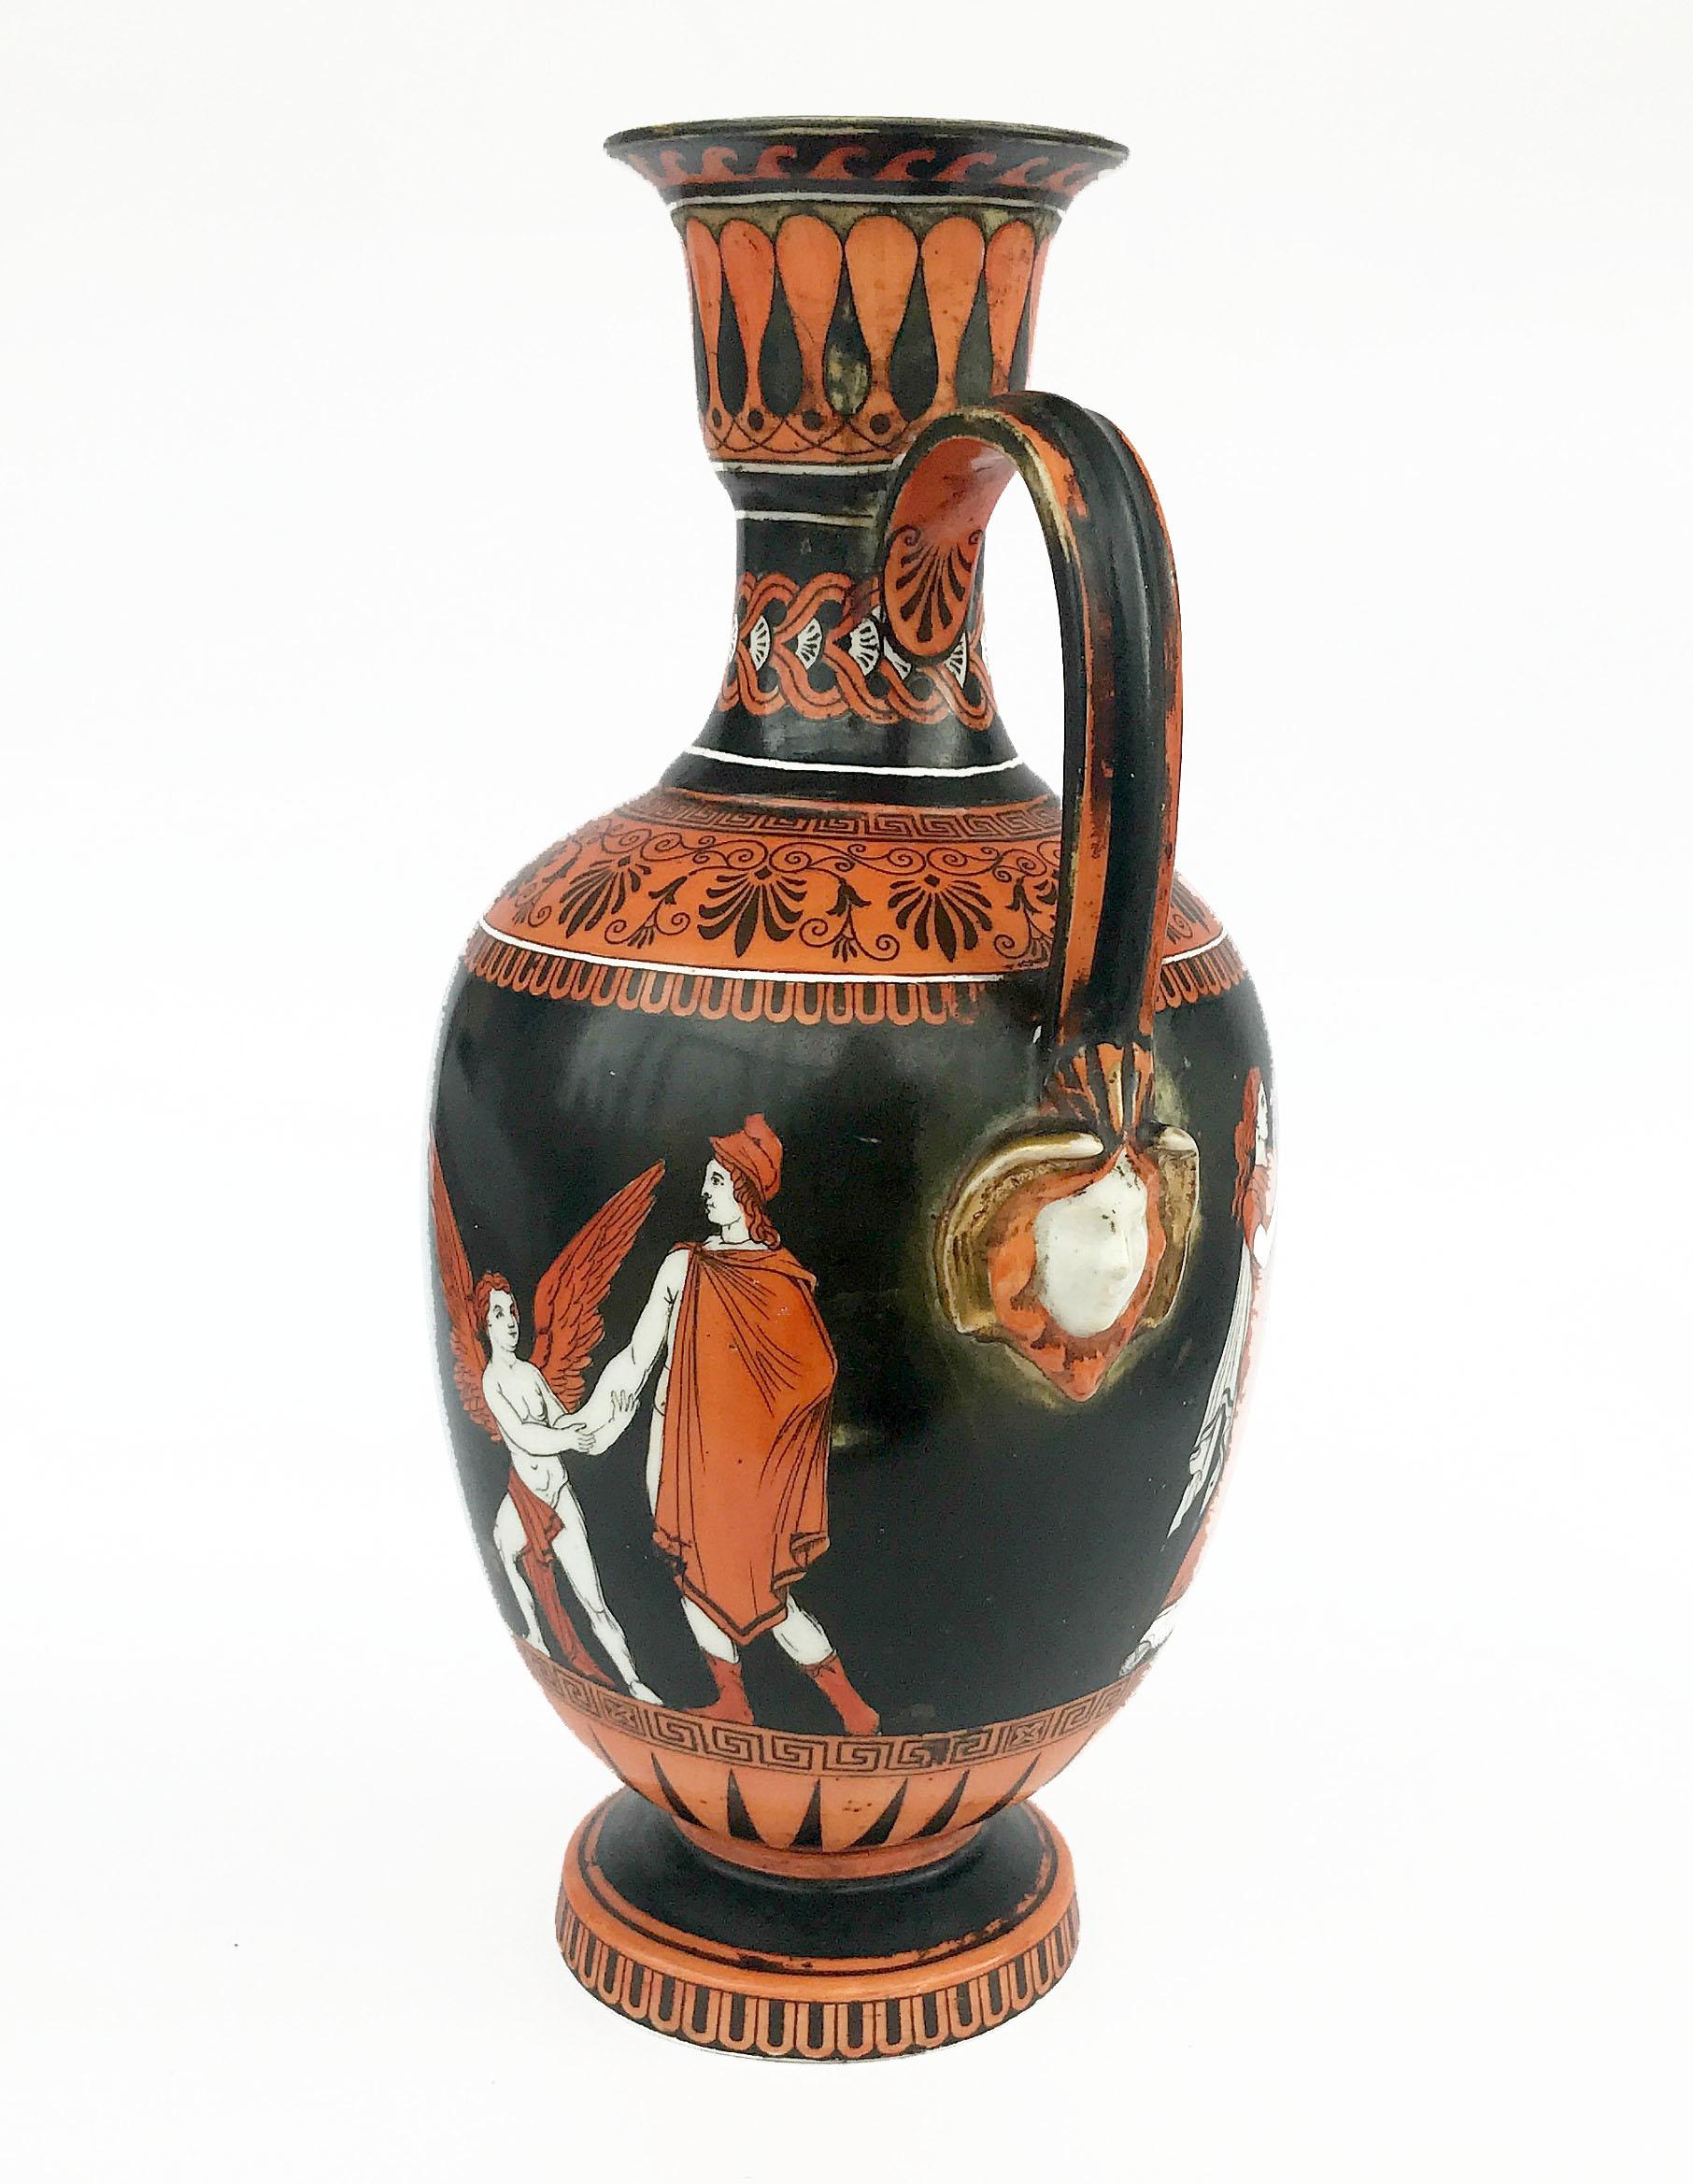 Neoclassical Revival 19th Century Samuel Alcock Neoclassical Porcelain Ewer Etruscan For Sale